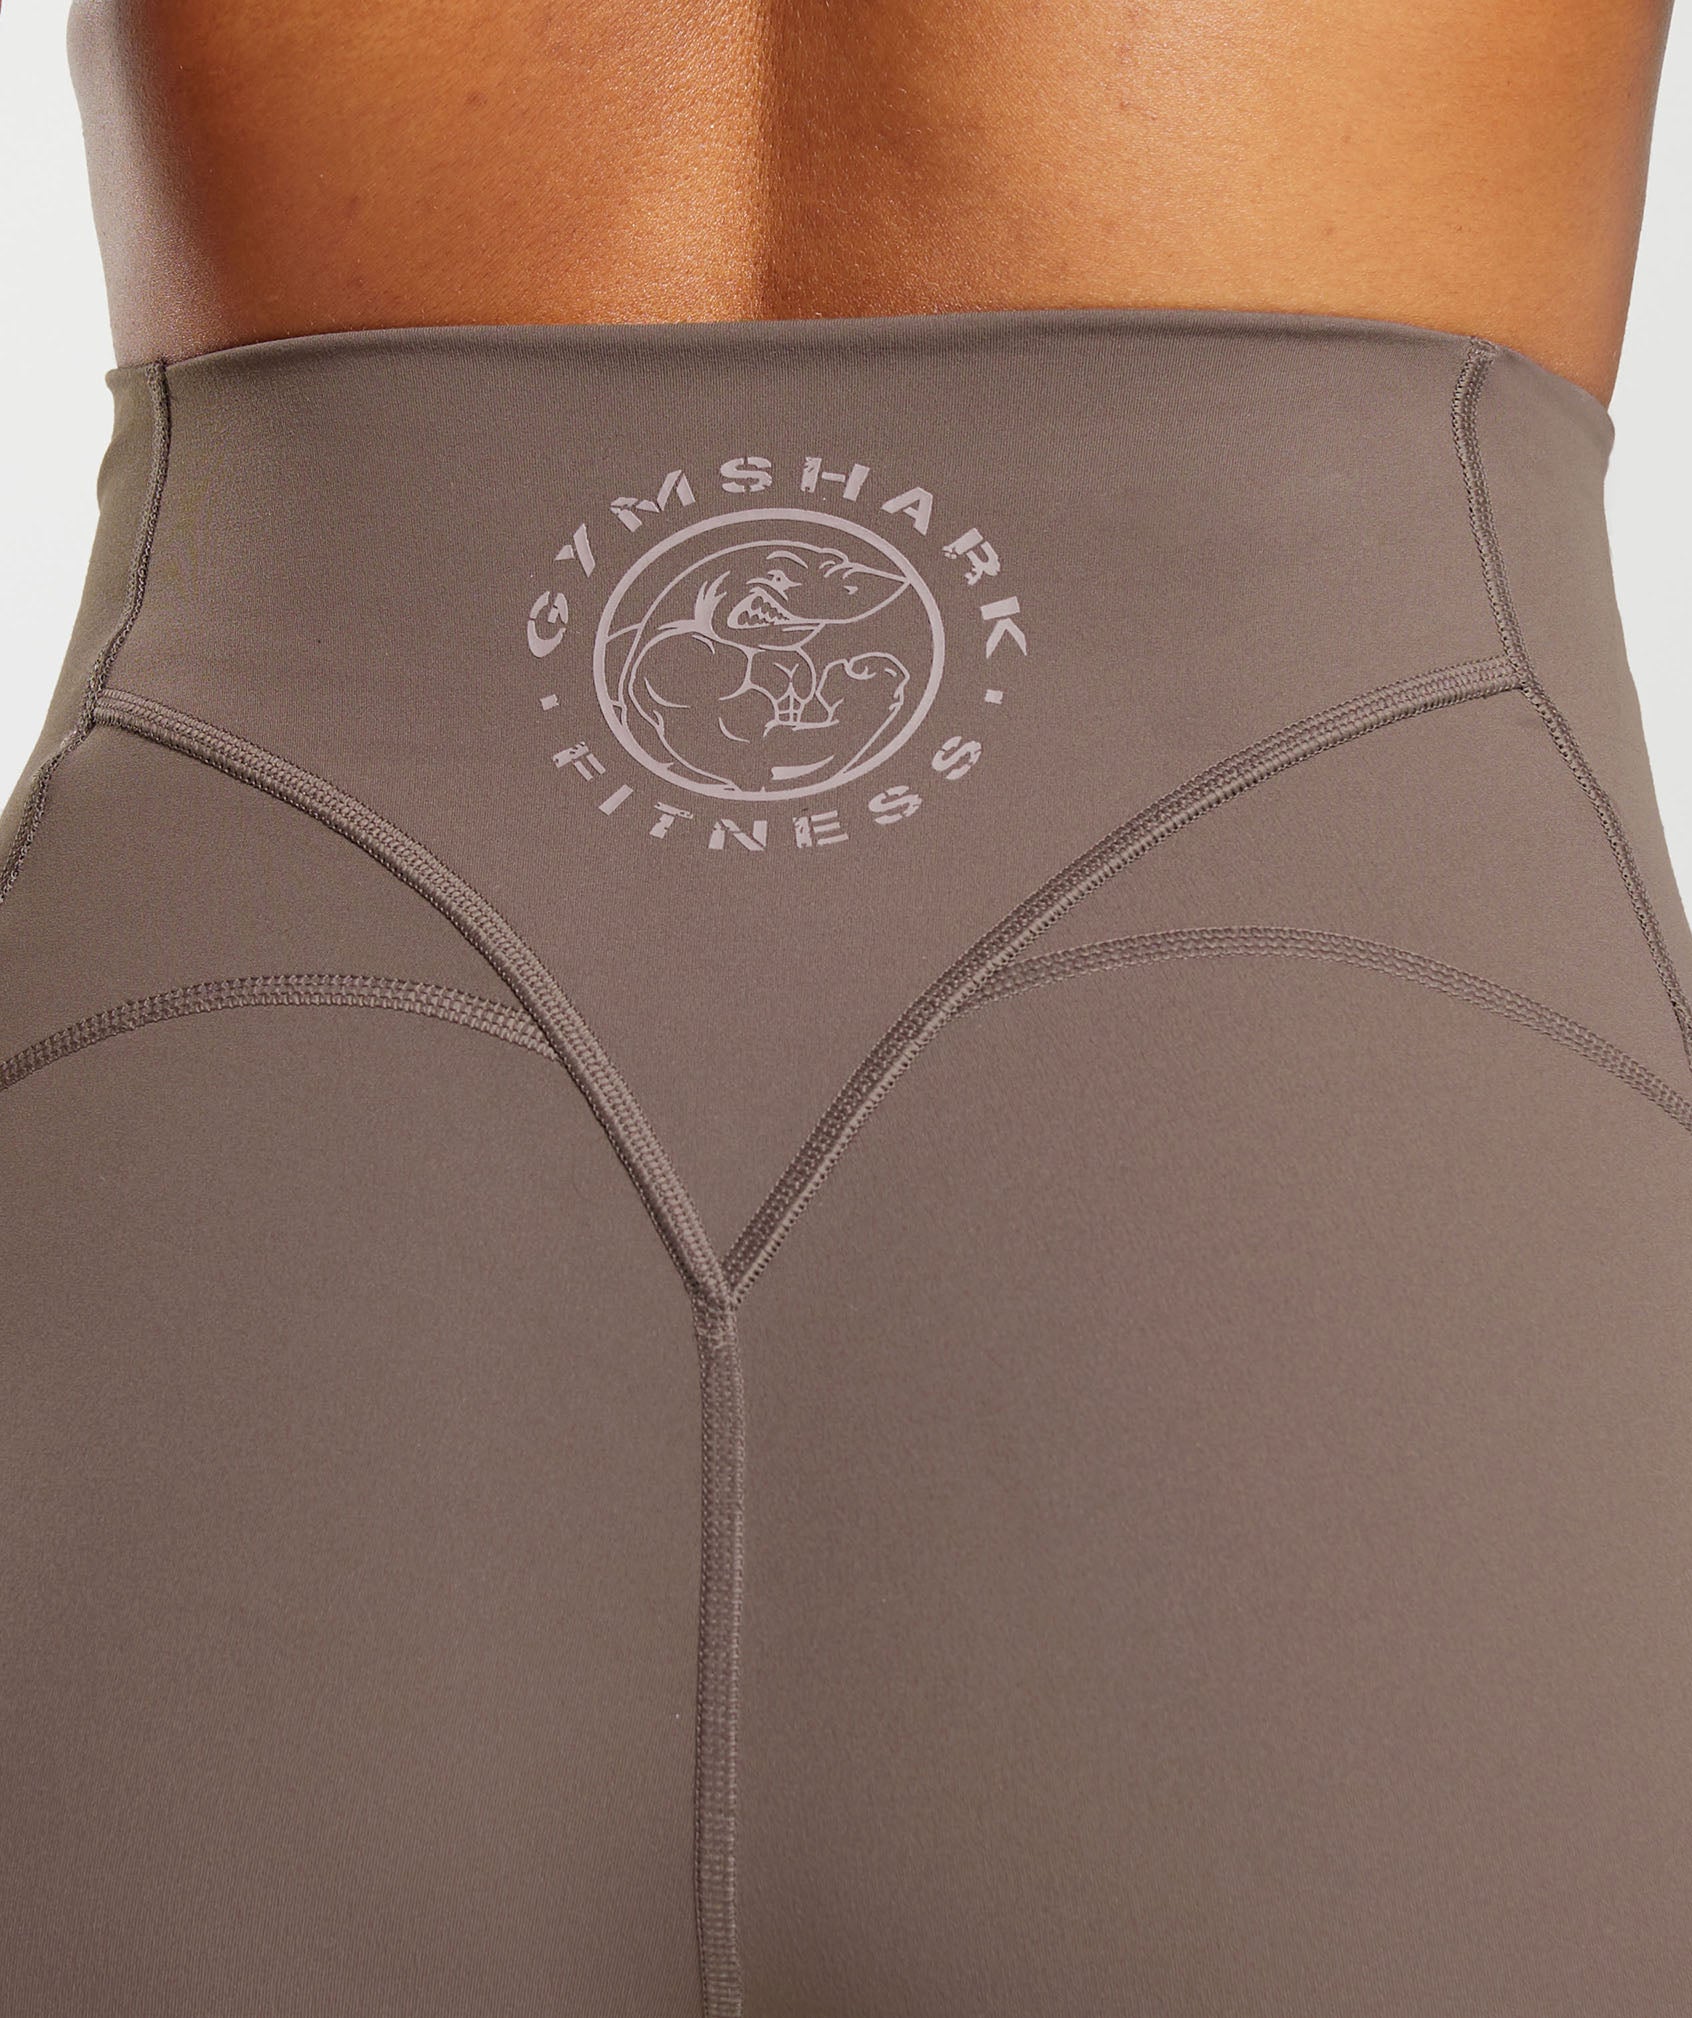 Legacy Tight Shorts in Walnut Mauve - view 6